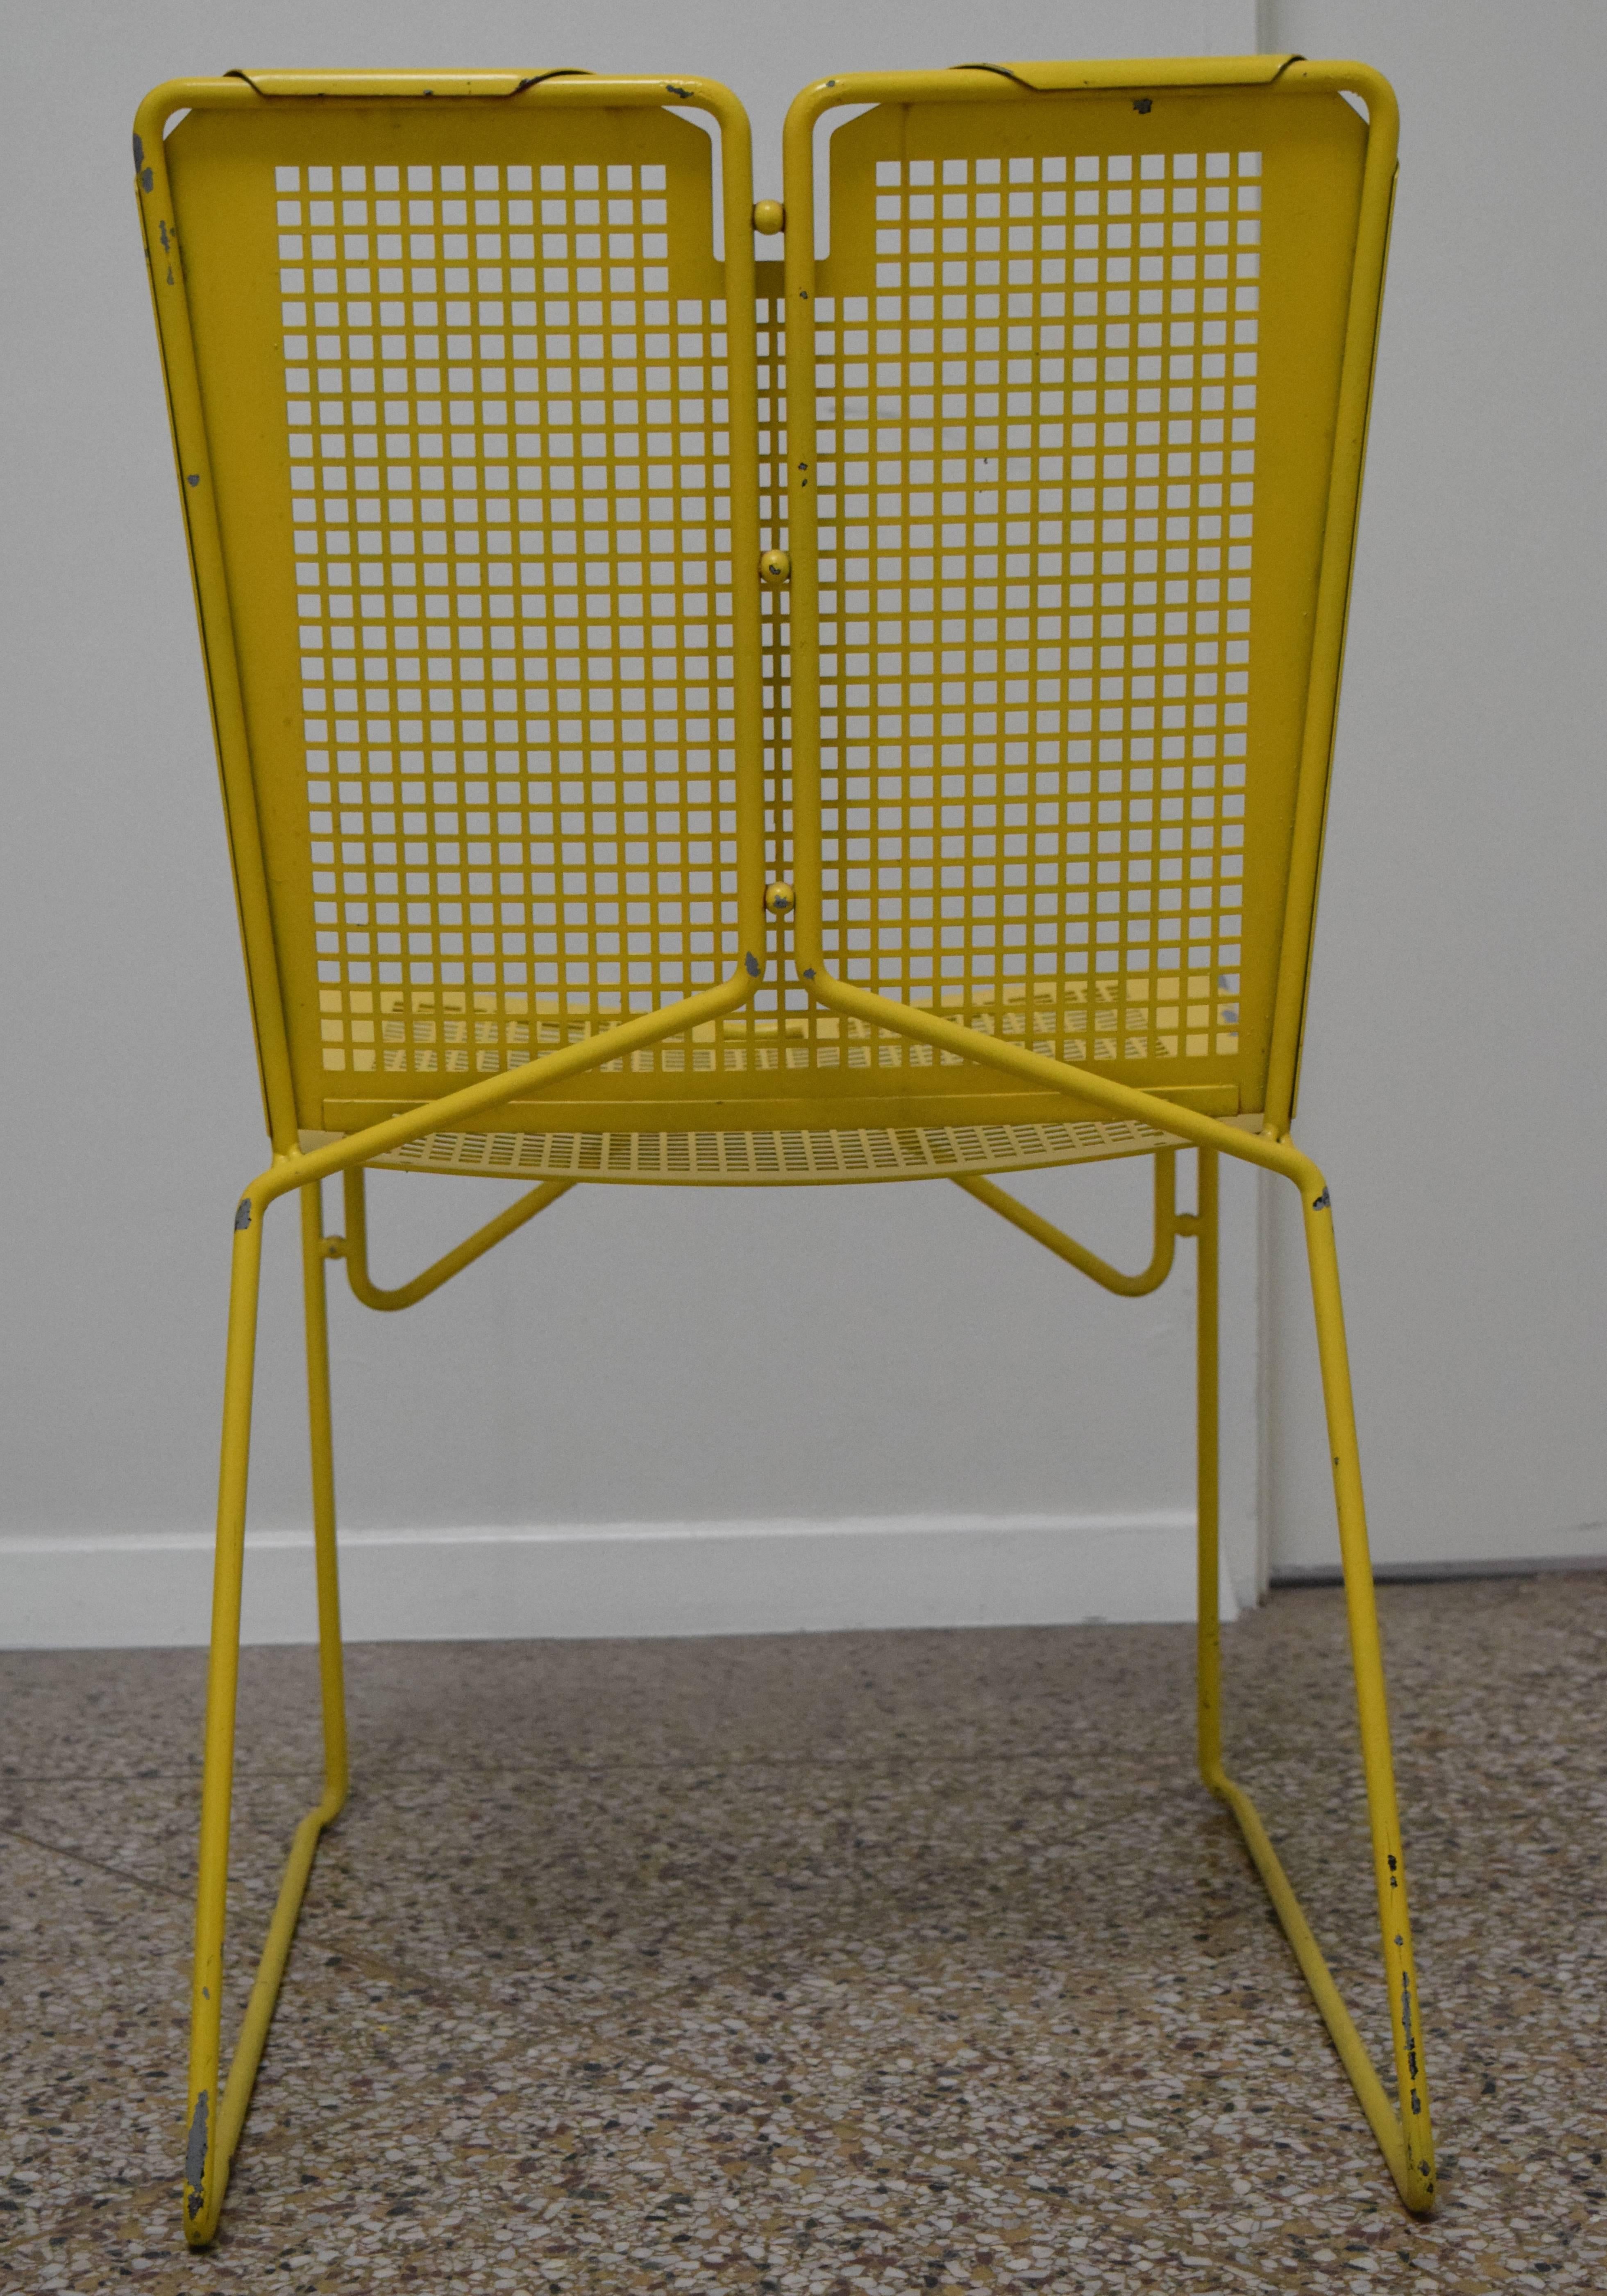 Vintage Perforated Steel Chairs In Distressed Condition For Sale In Princeton, NJ